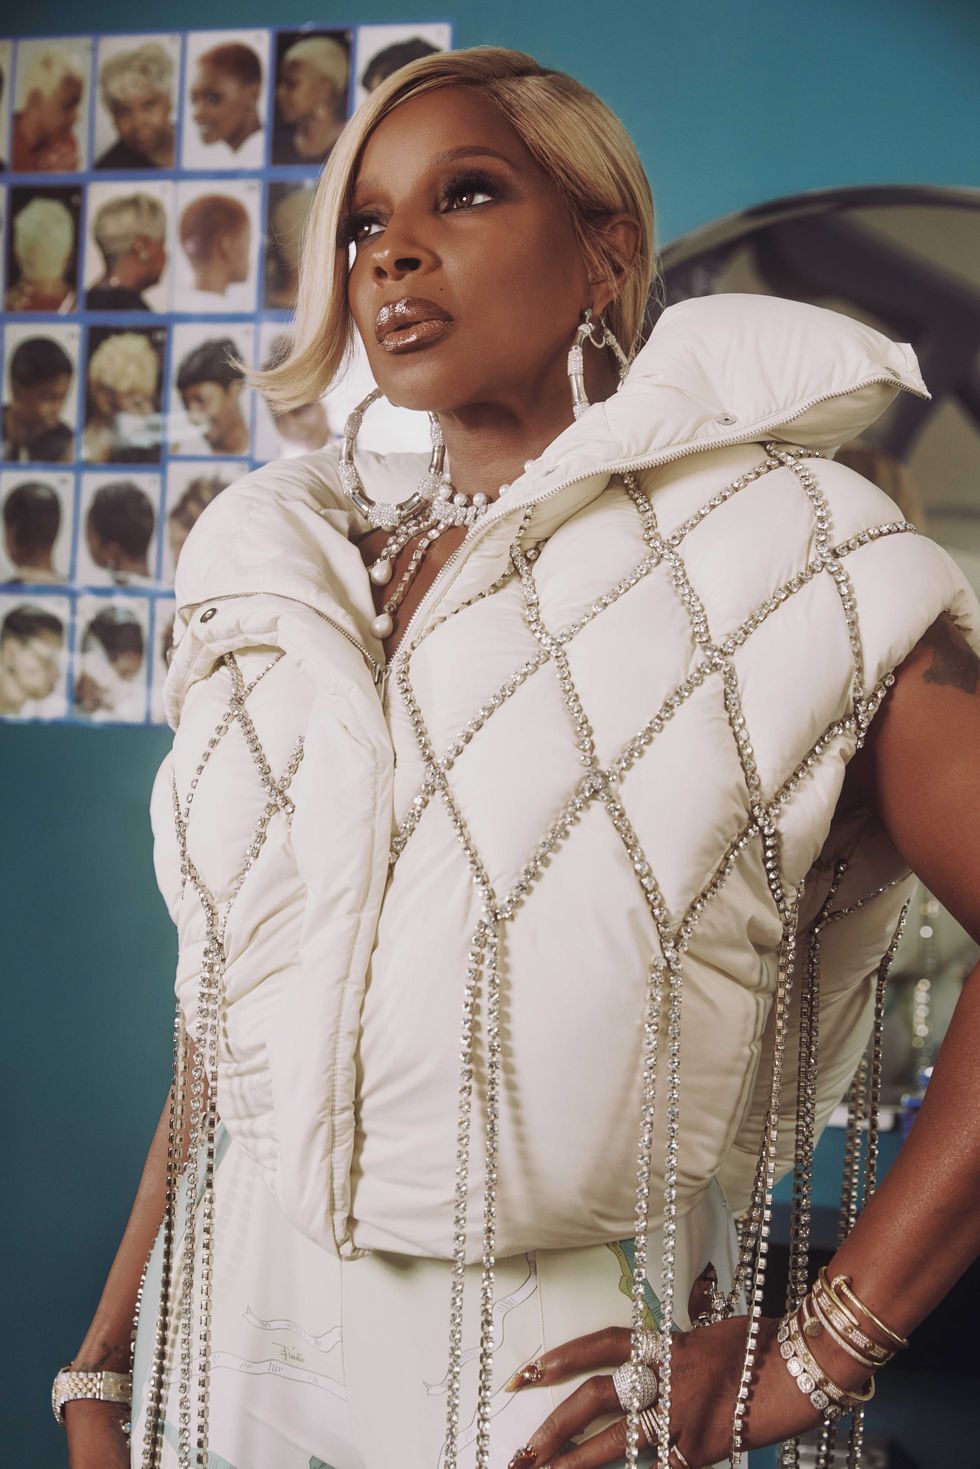 Nude Black Sluts Gold Chains - Mary J. Blige on Navigating Self-Acceptance Through Beauty